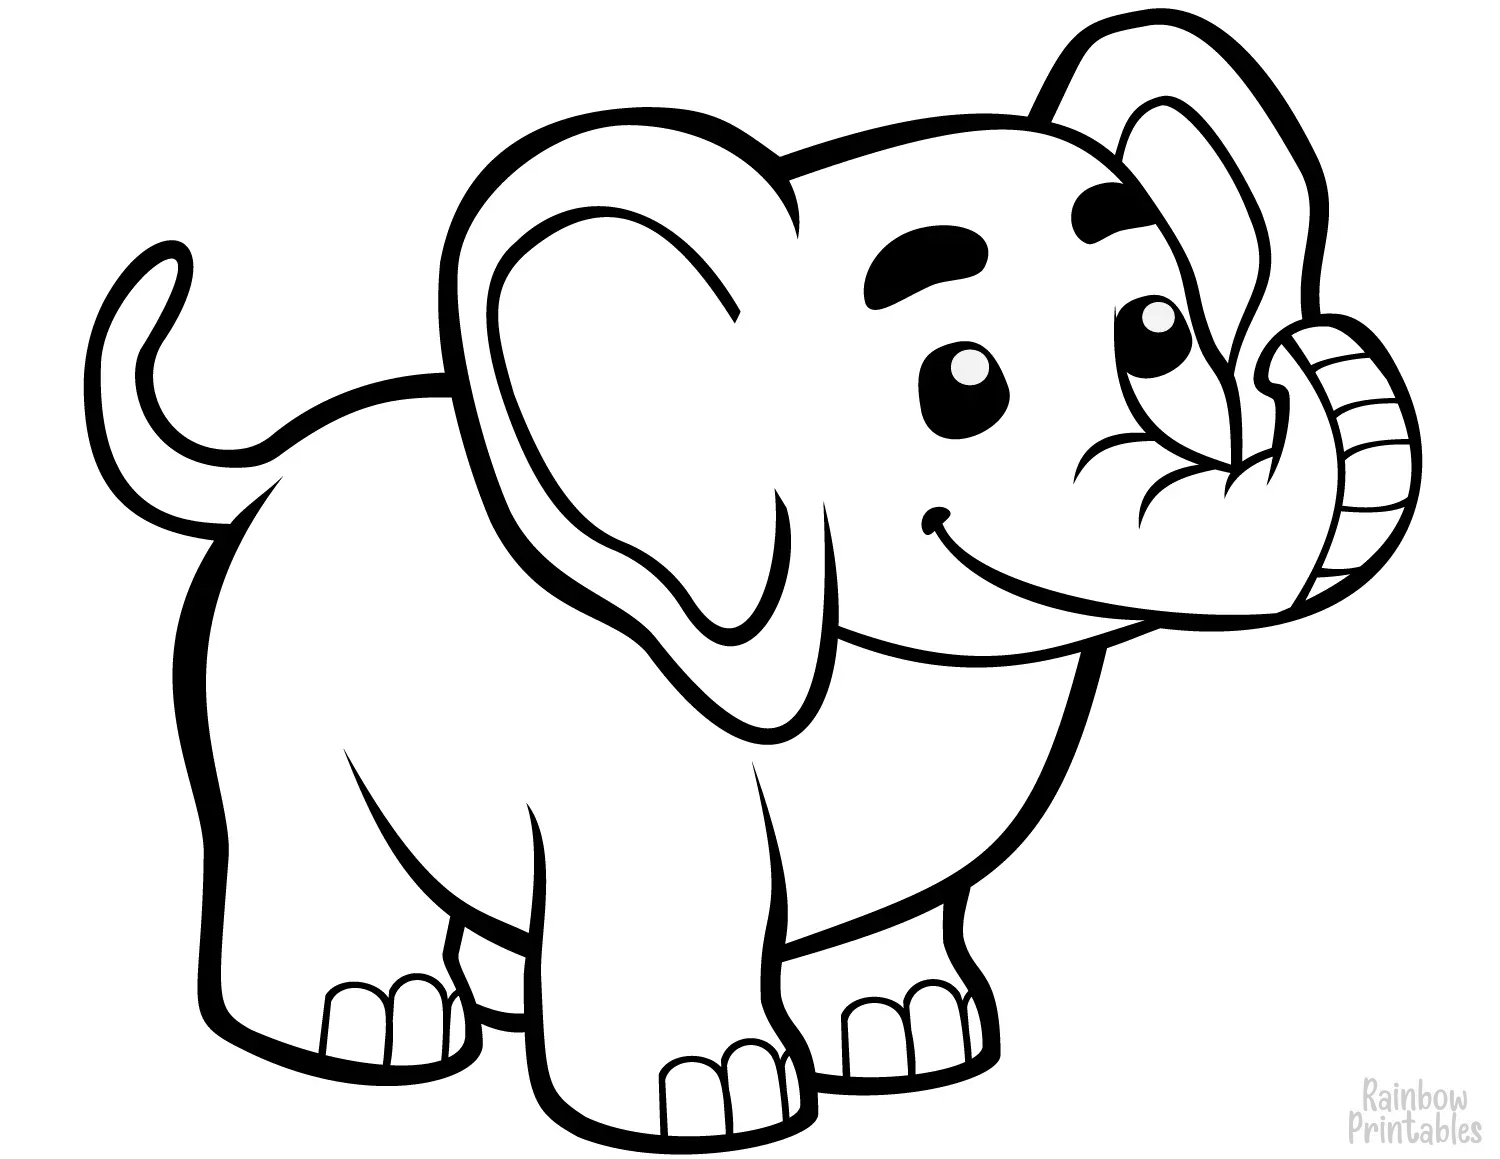 Simple-easy-happy-baby-elephant-coloring-page